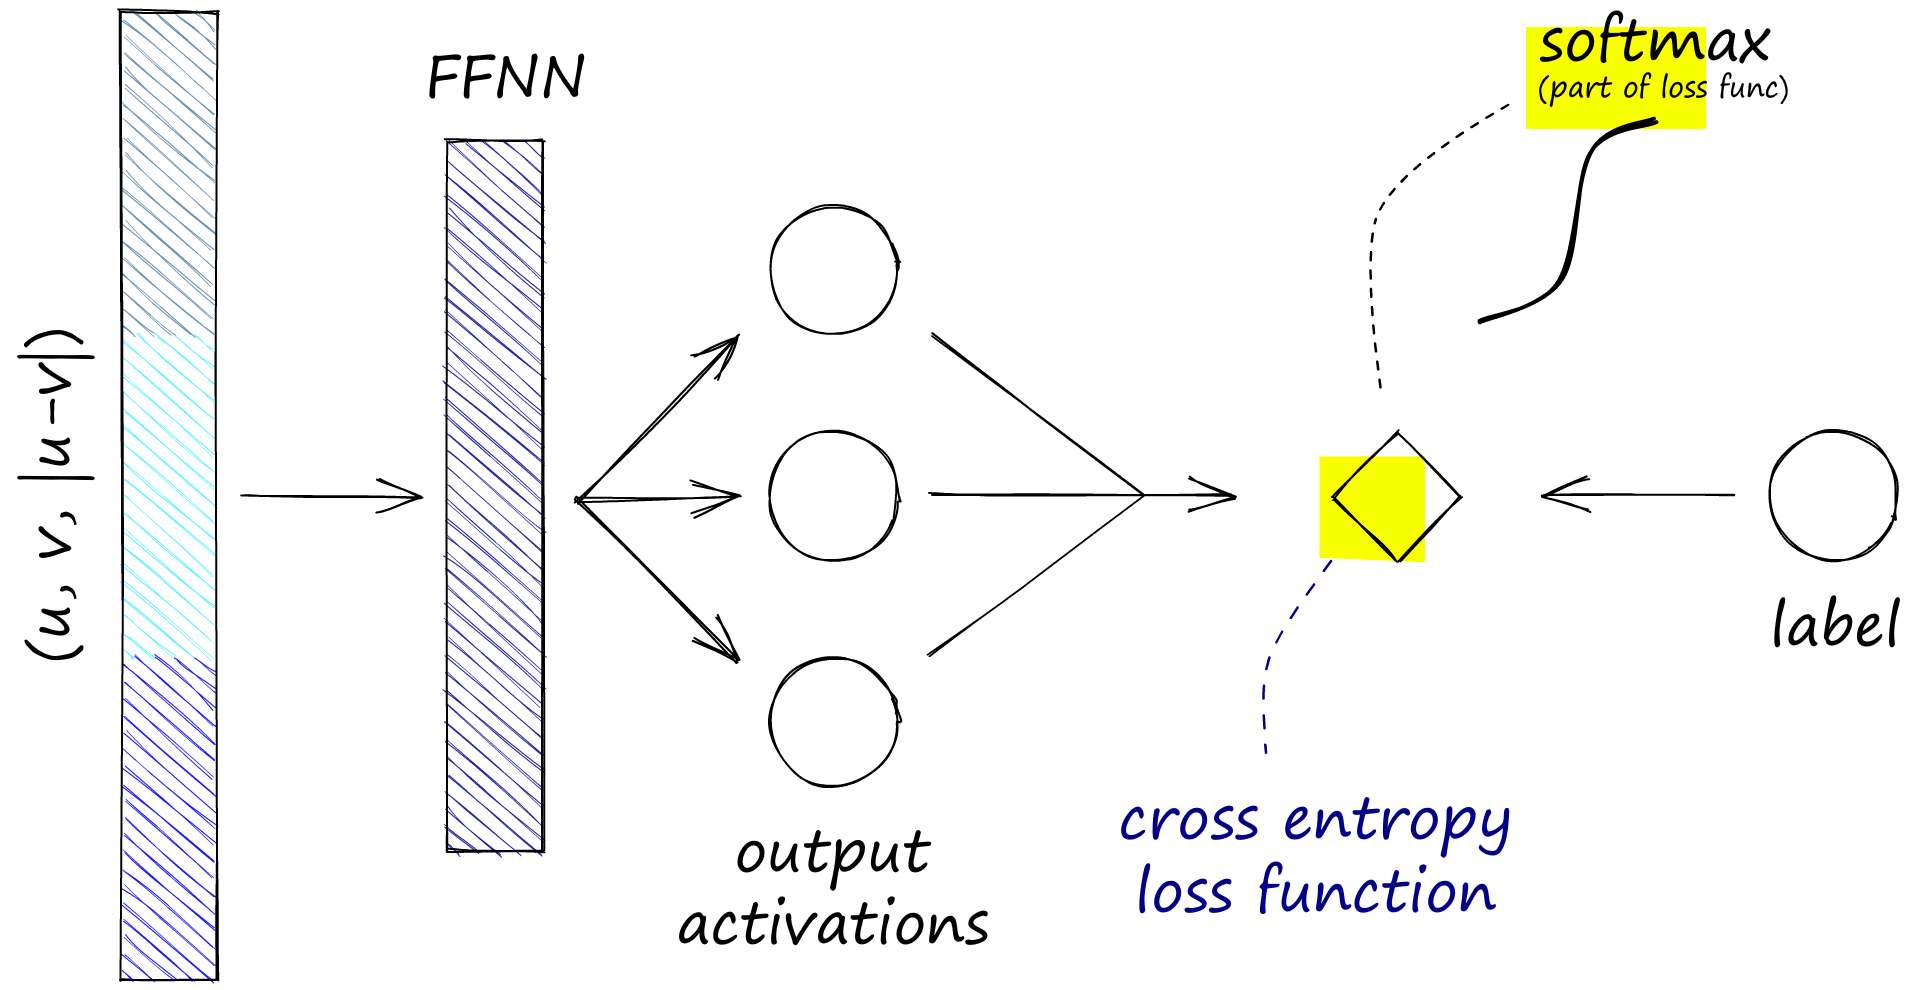 The operations were performed during training on two sentence embeddings, u and v. Note that softmax-loss refers cross-entropy loss (which contains a softmax function by default).